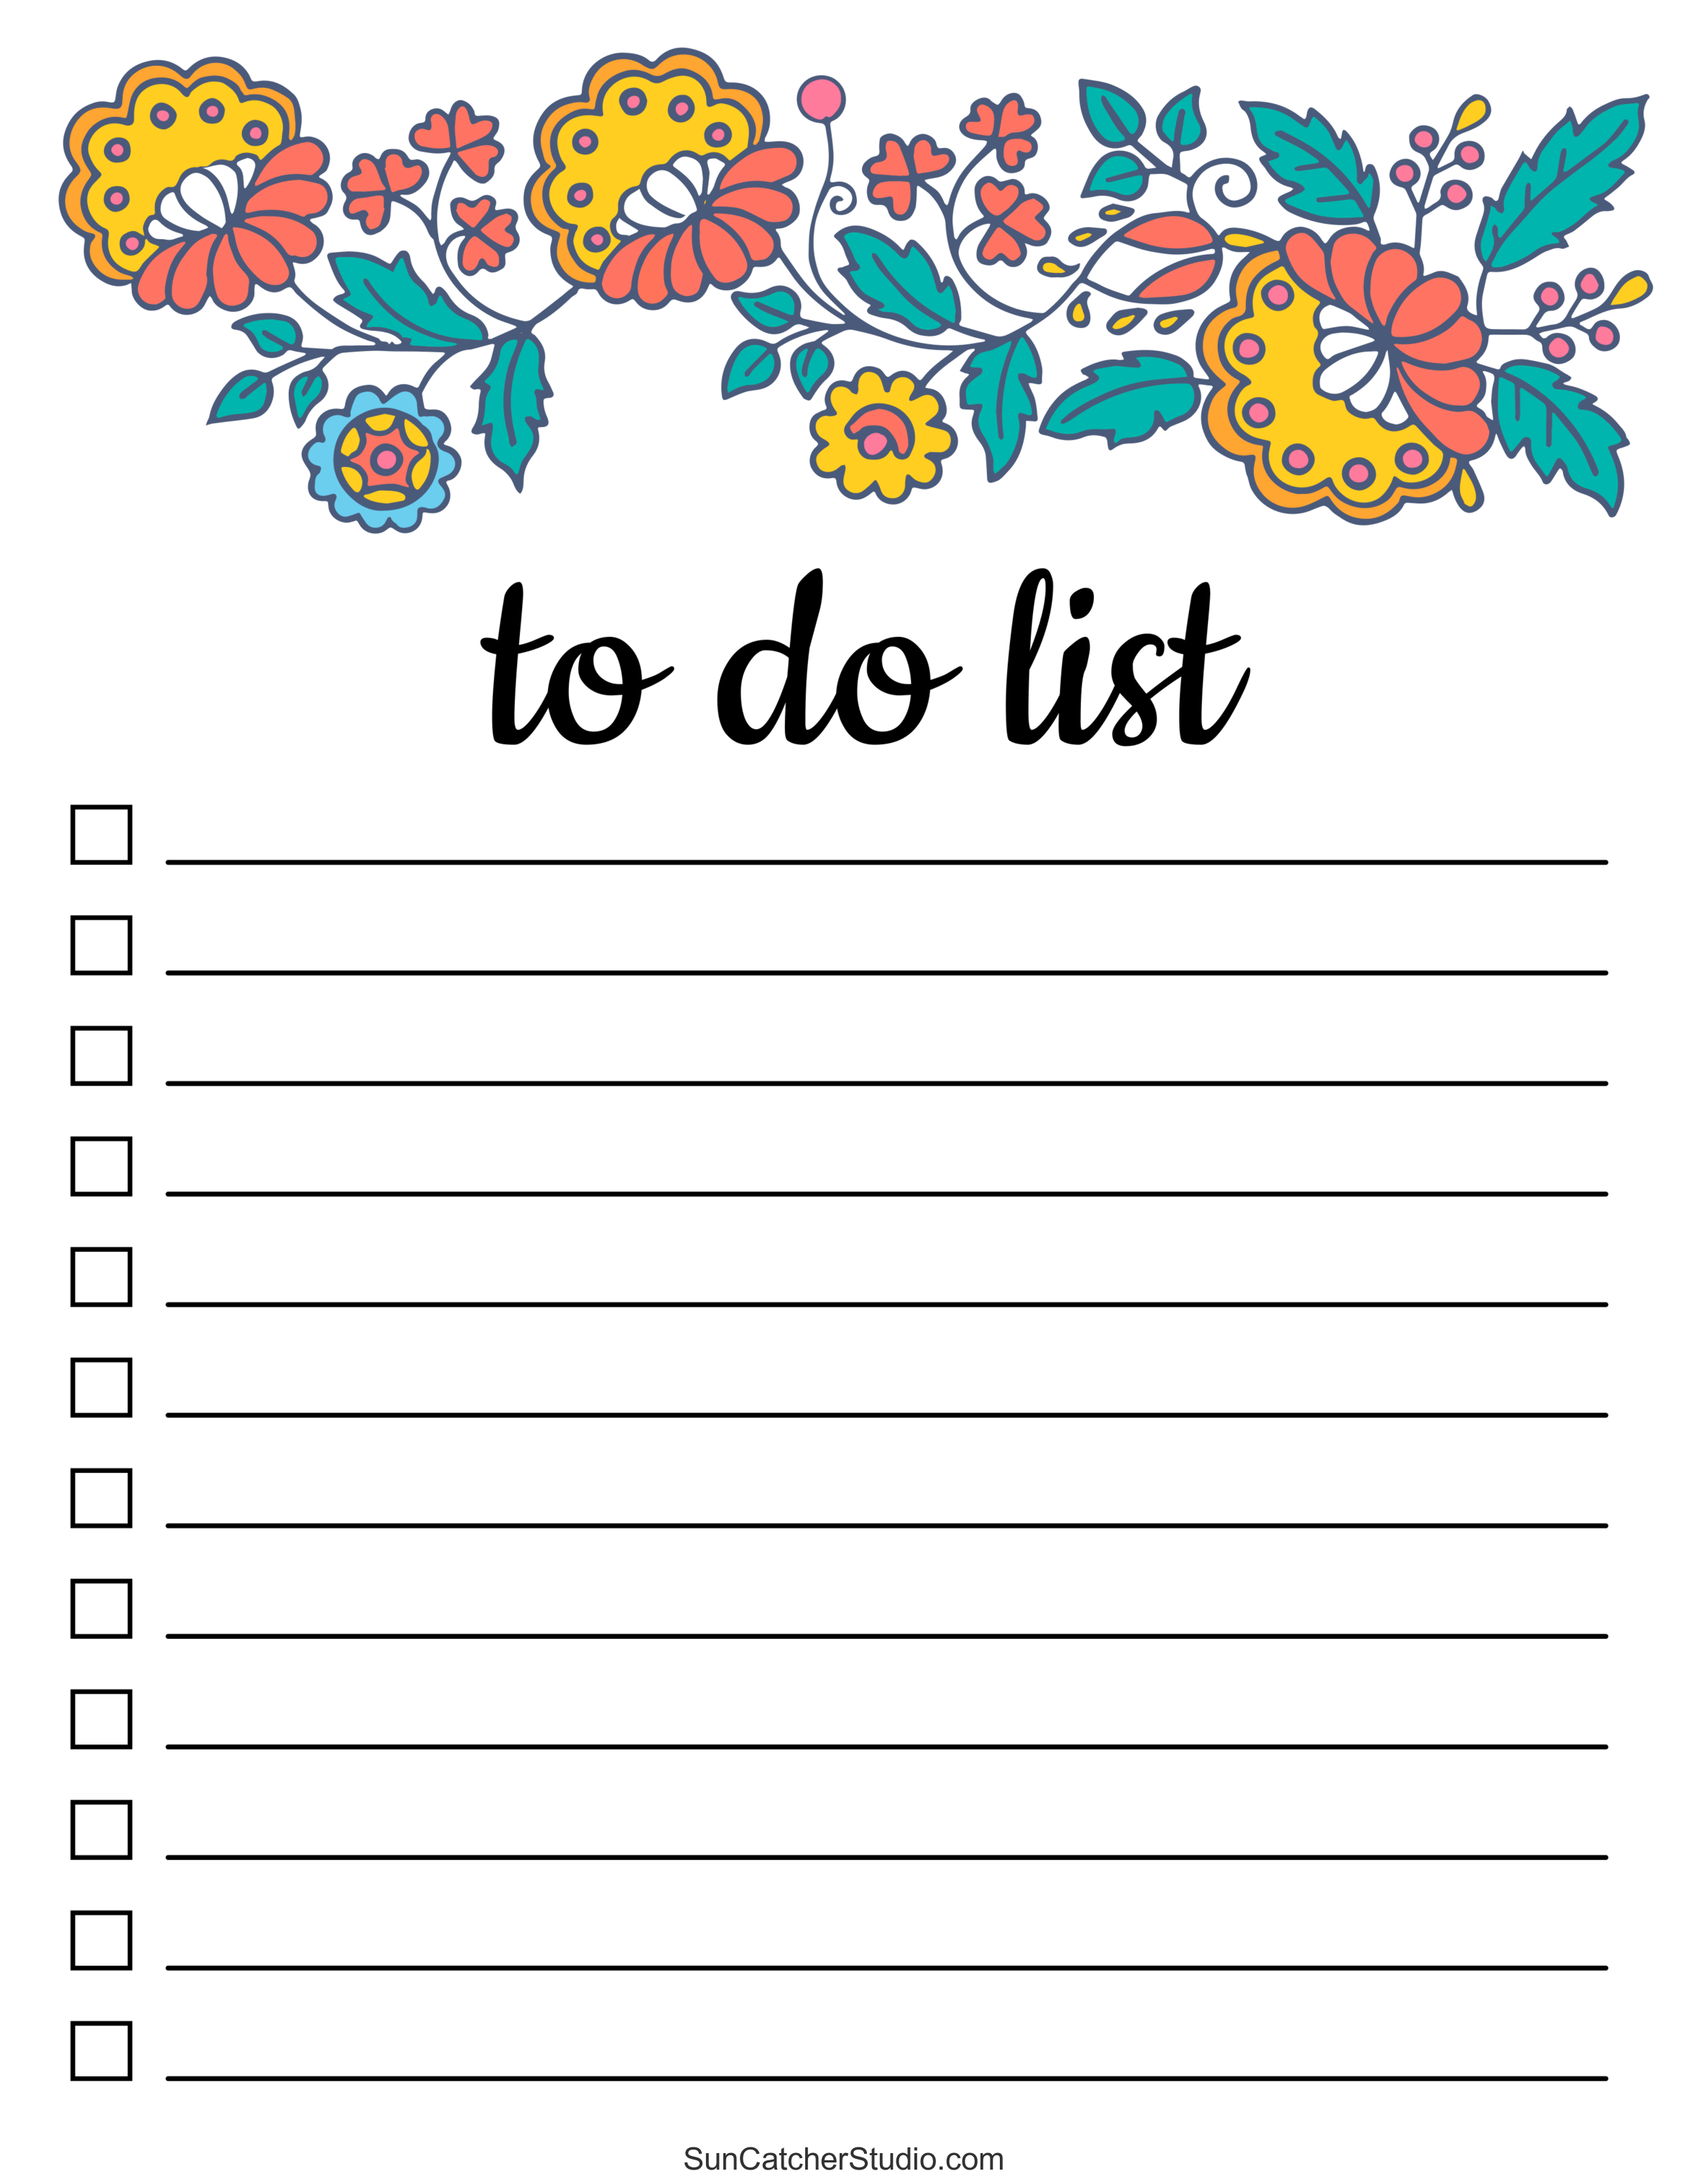 Cute Printable To Do Lists: Get Organized and Add a Touch of Adorable